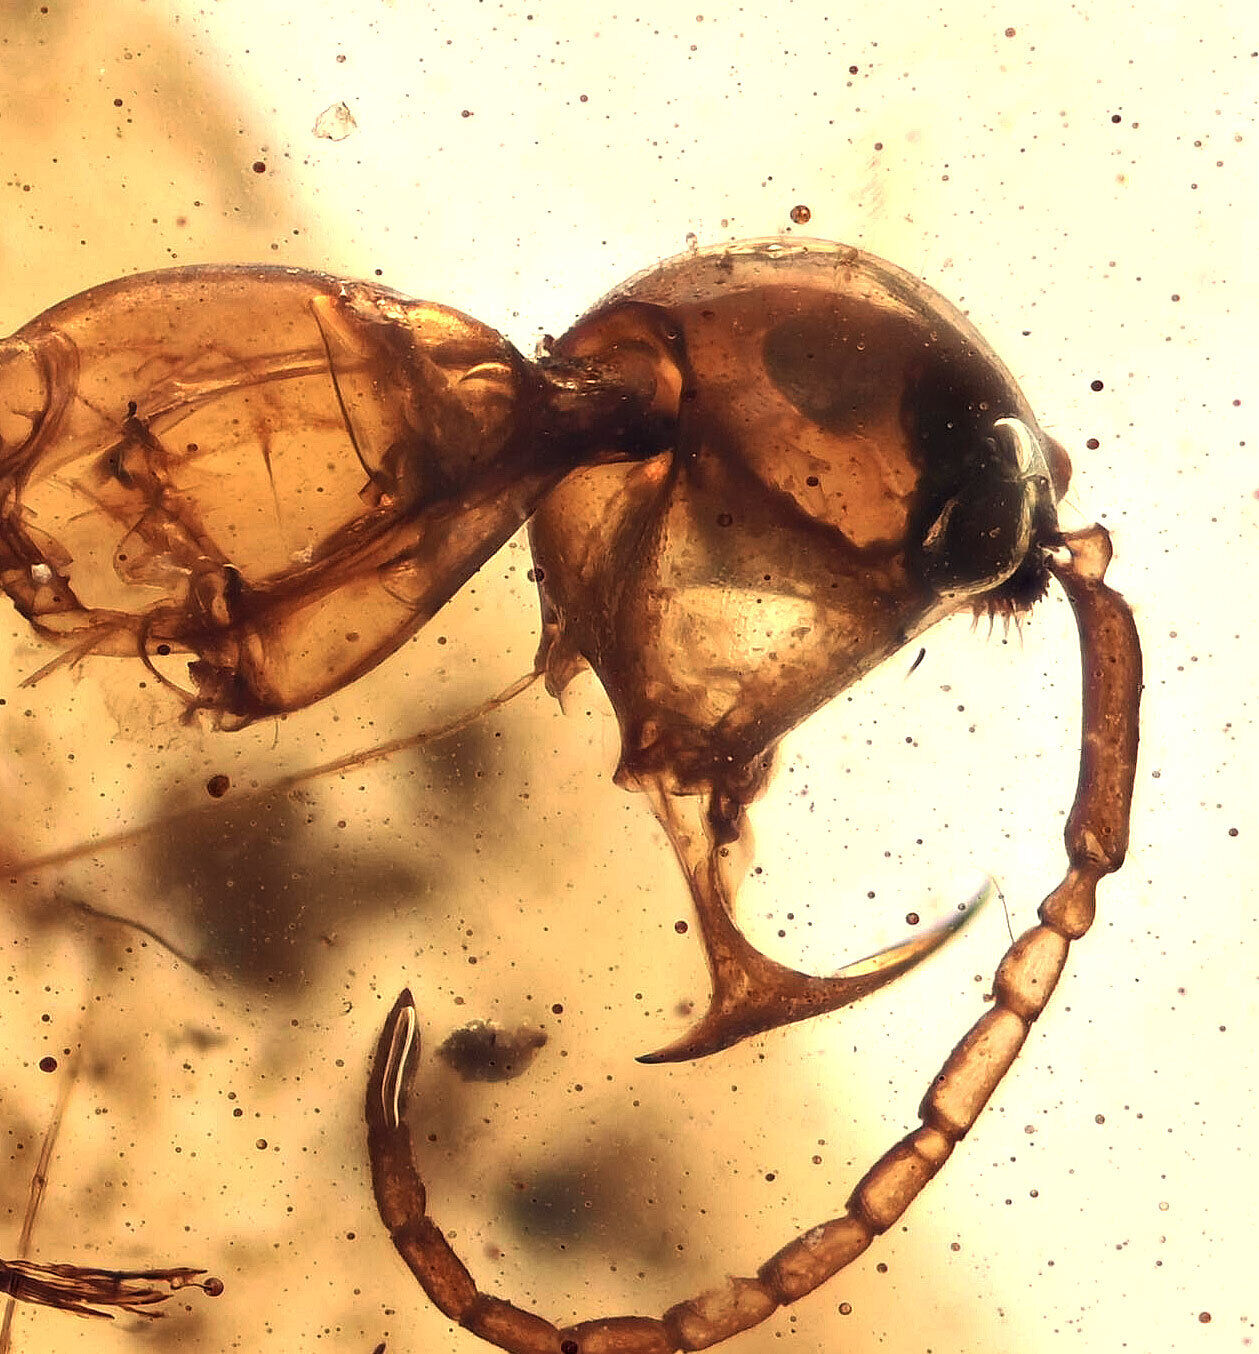 RARE Haidomyrmex (Hell Ant), Fossil inclusion in Burmese Amber